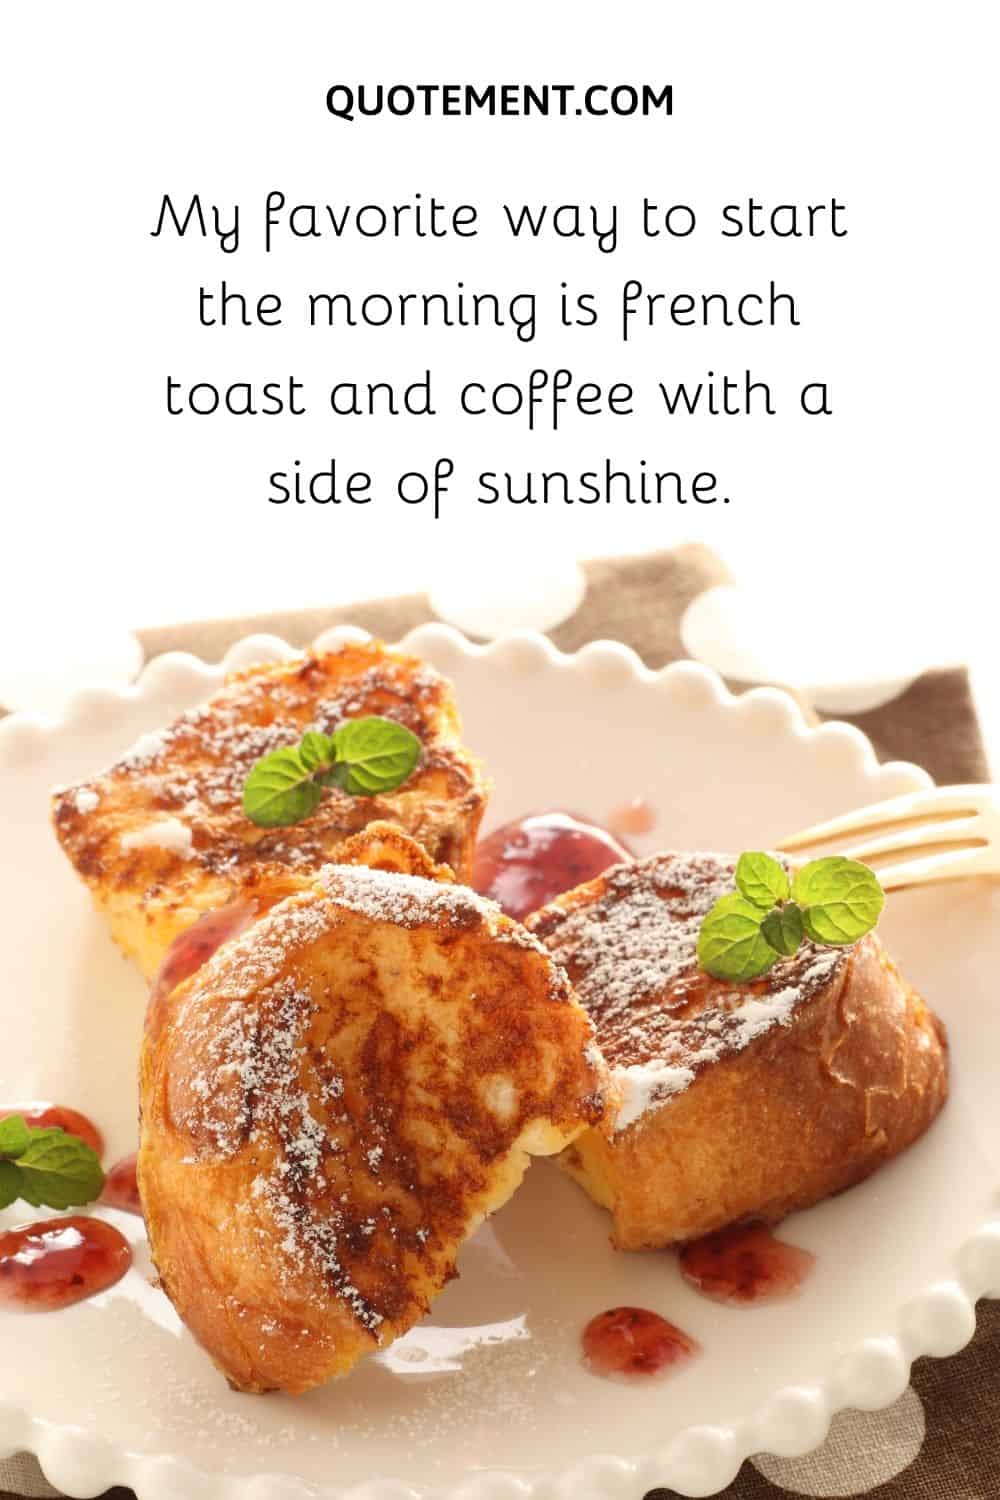 My favorite way to start the morning is french toast